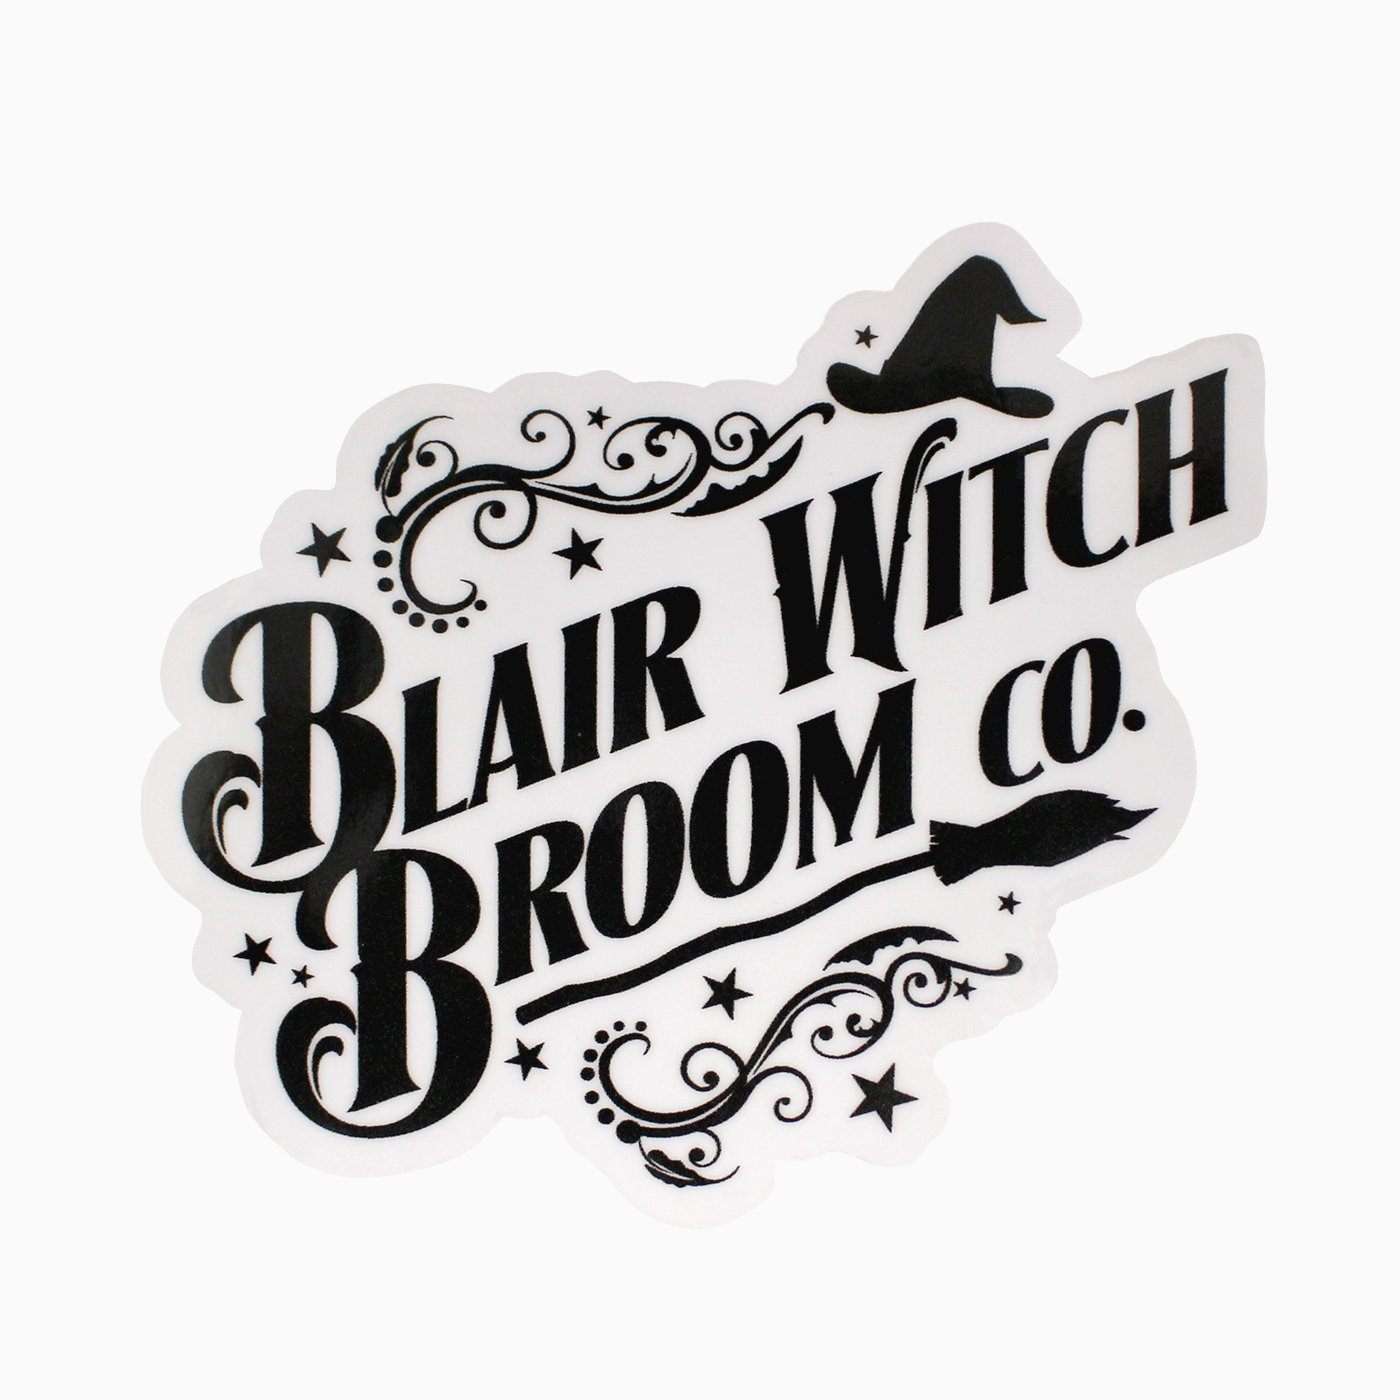 Blair Witch Broom Company / Sticker - Route One Apparel